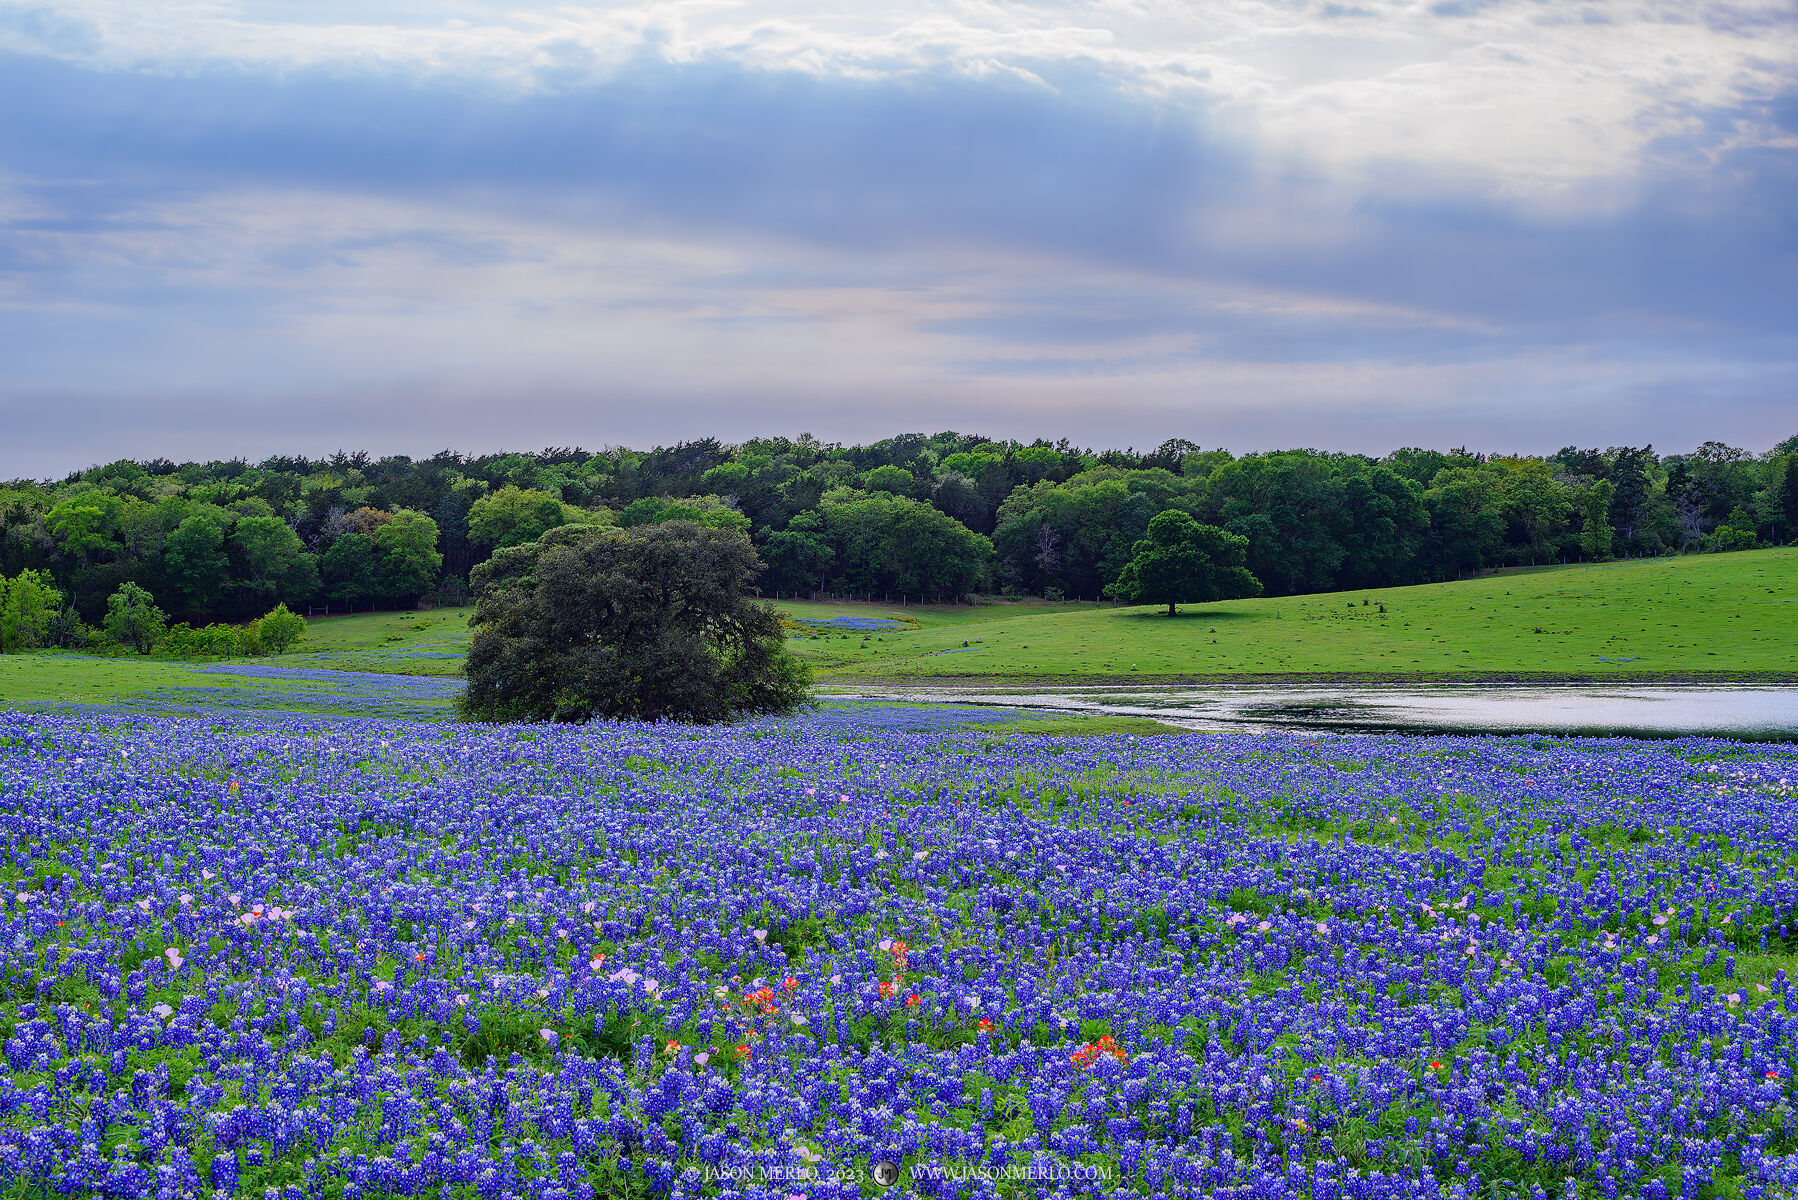 A field of Texas bluebonnets (Lupinus texensis) in Washington County in the Texas Blackland Prairie